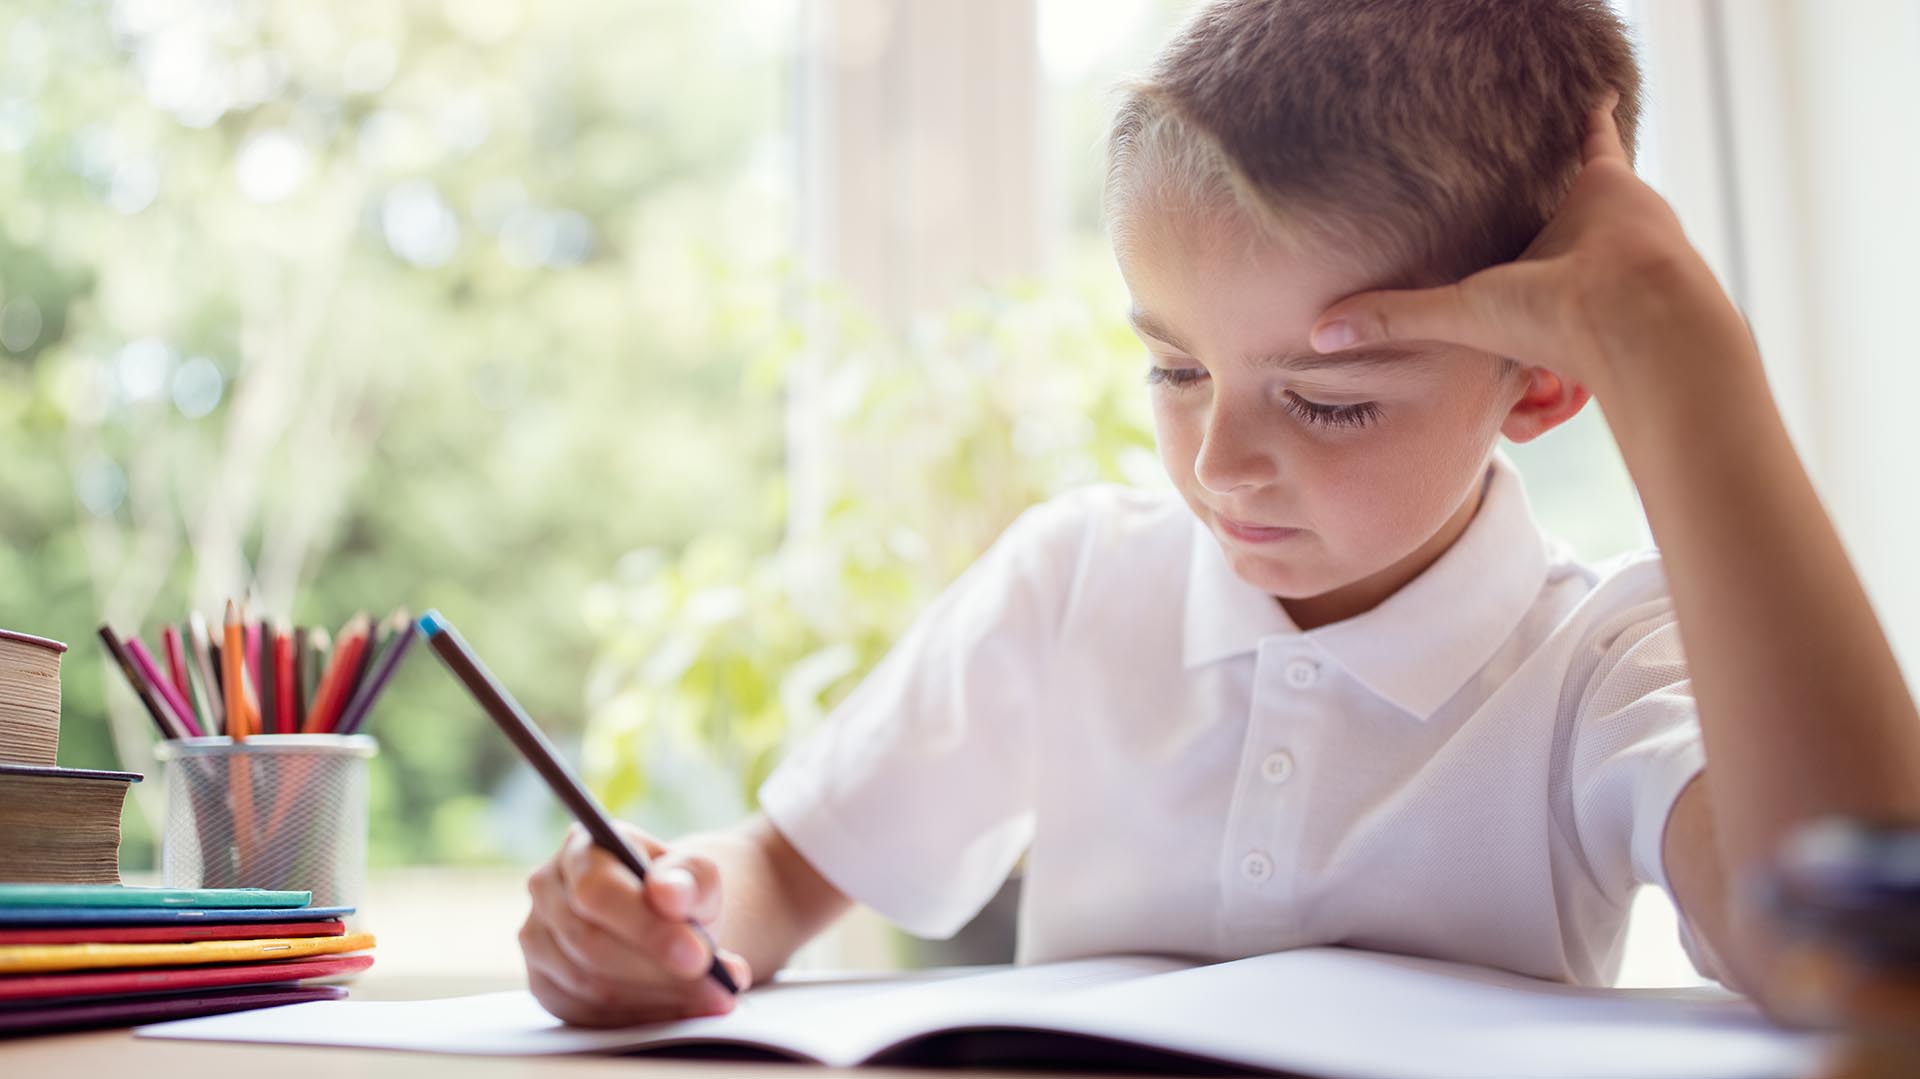 When starting school, the child with dyslexia confuses the order of letters within words (Getty Images)